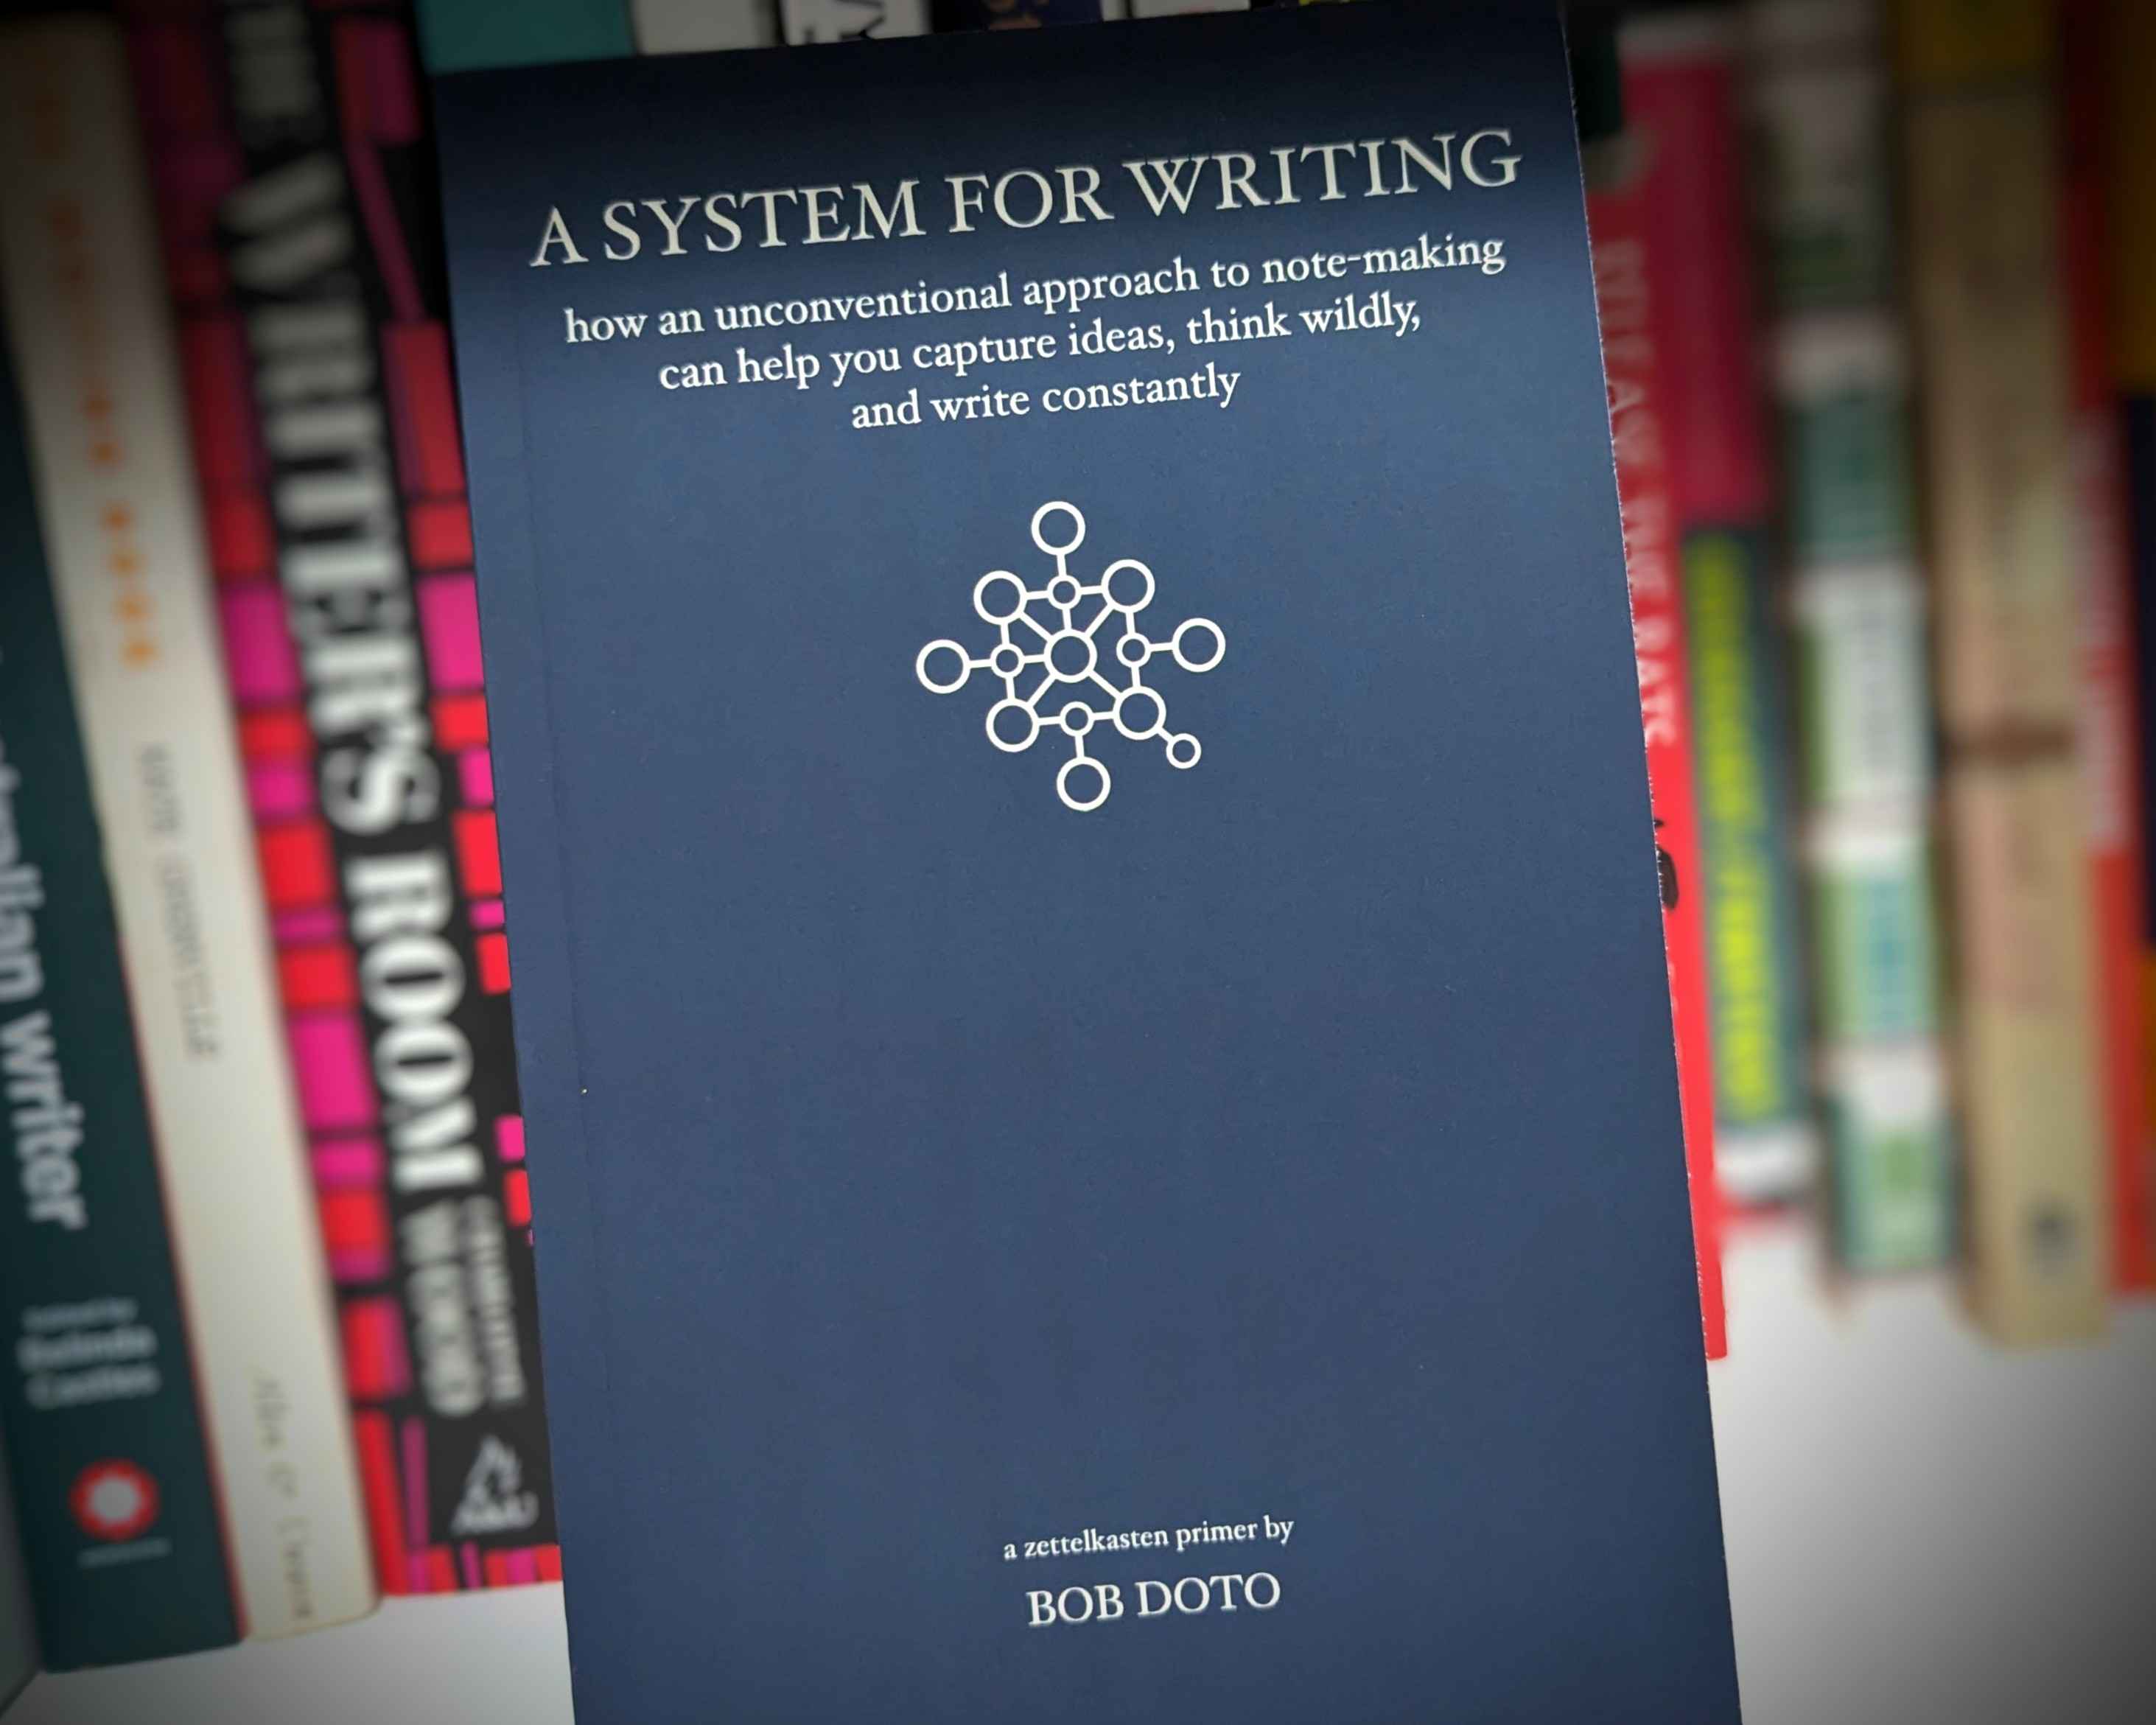 the book cover of A System for Writing by Bob Doto. In the out-of-focus background are book spines in a bookcase